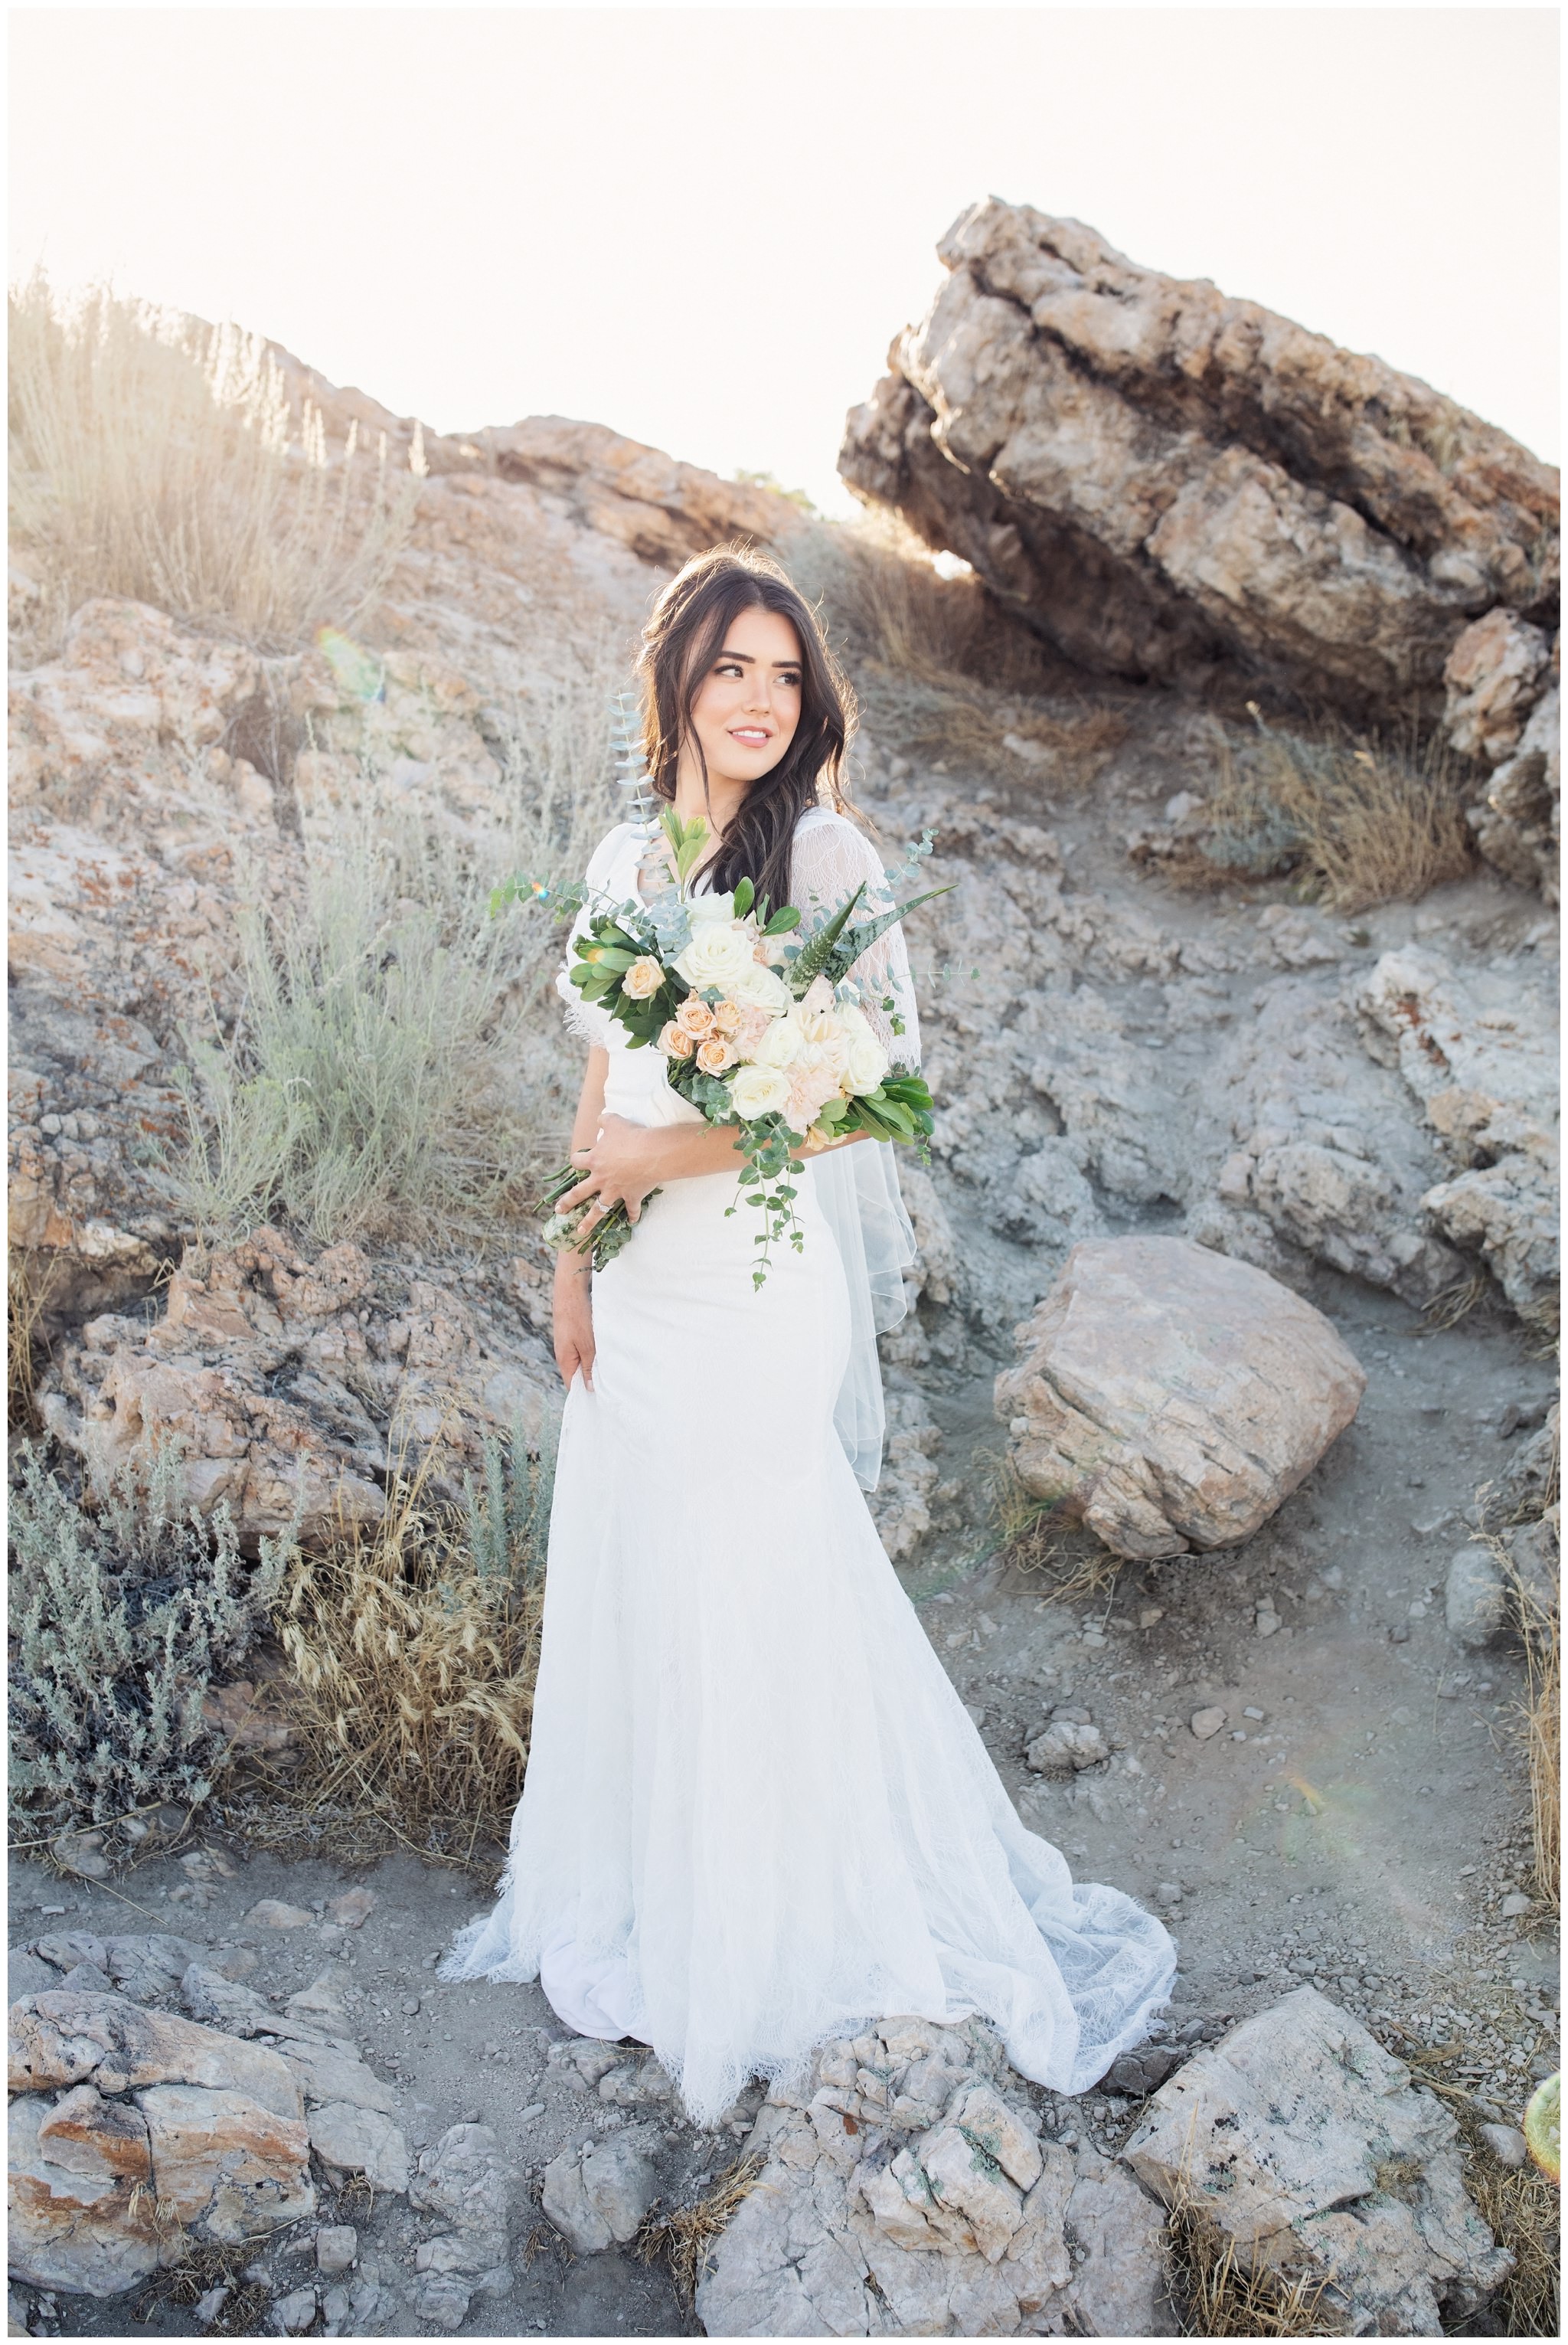 Bride's pictures of her holding wedding bouquet looking off in the distance near rocky background in Utah